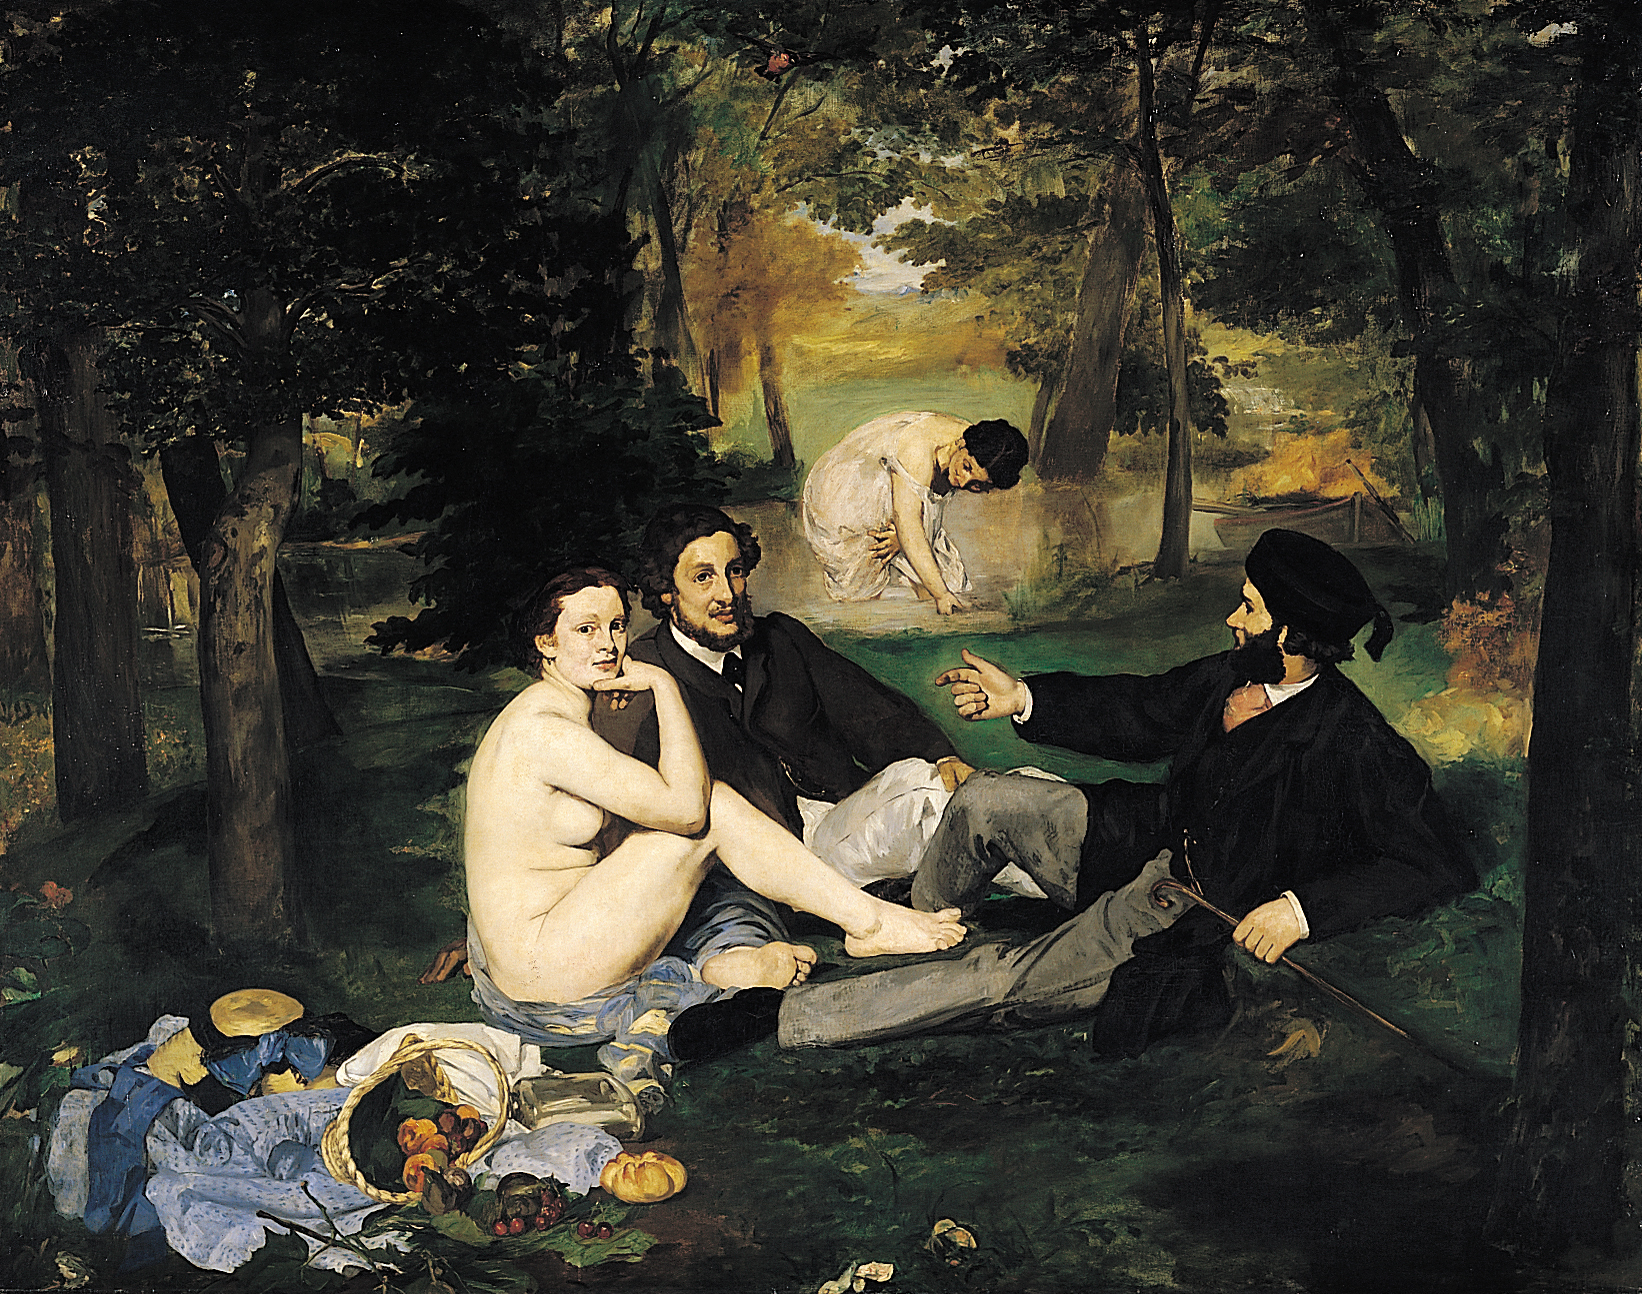 feasts: Édouard Manet, Luncheon on the Grass